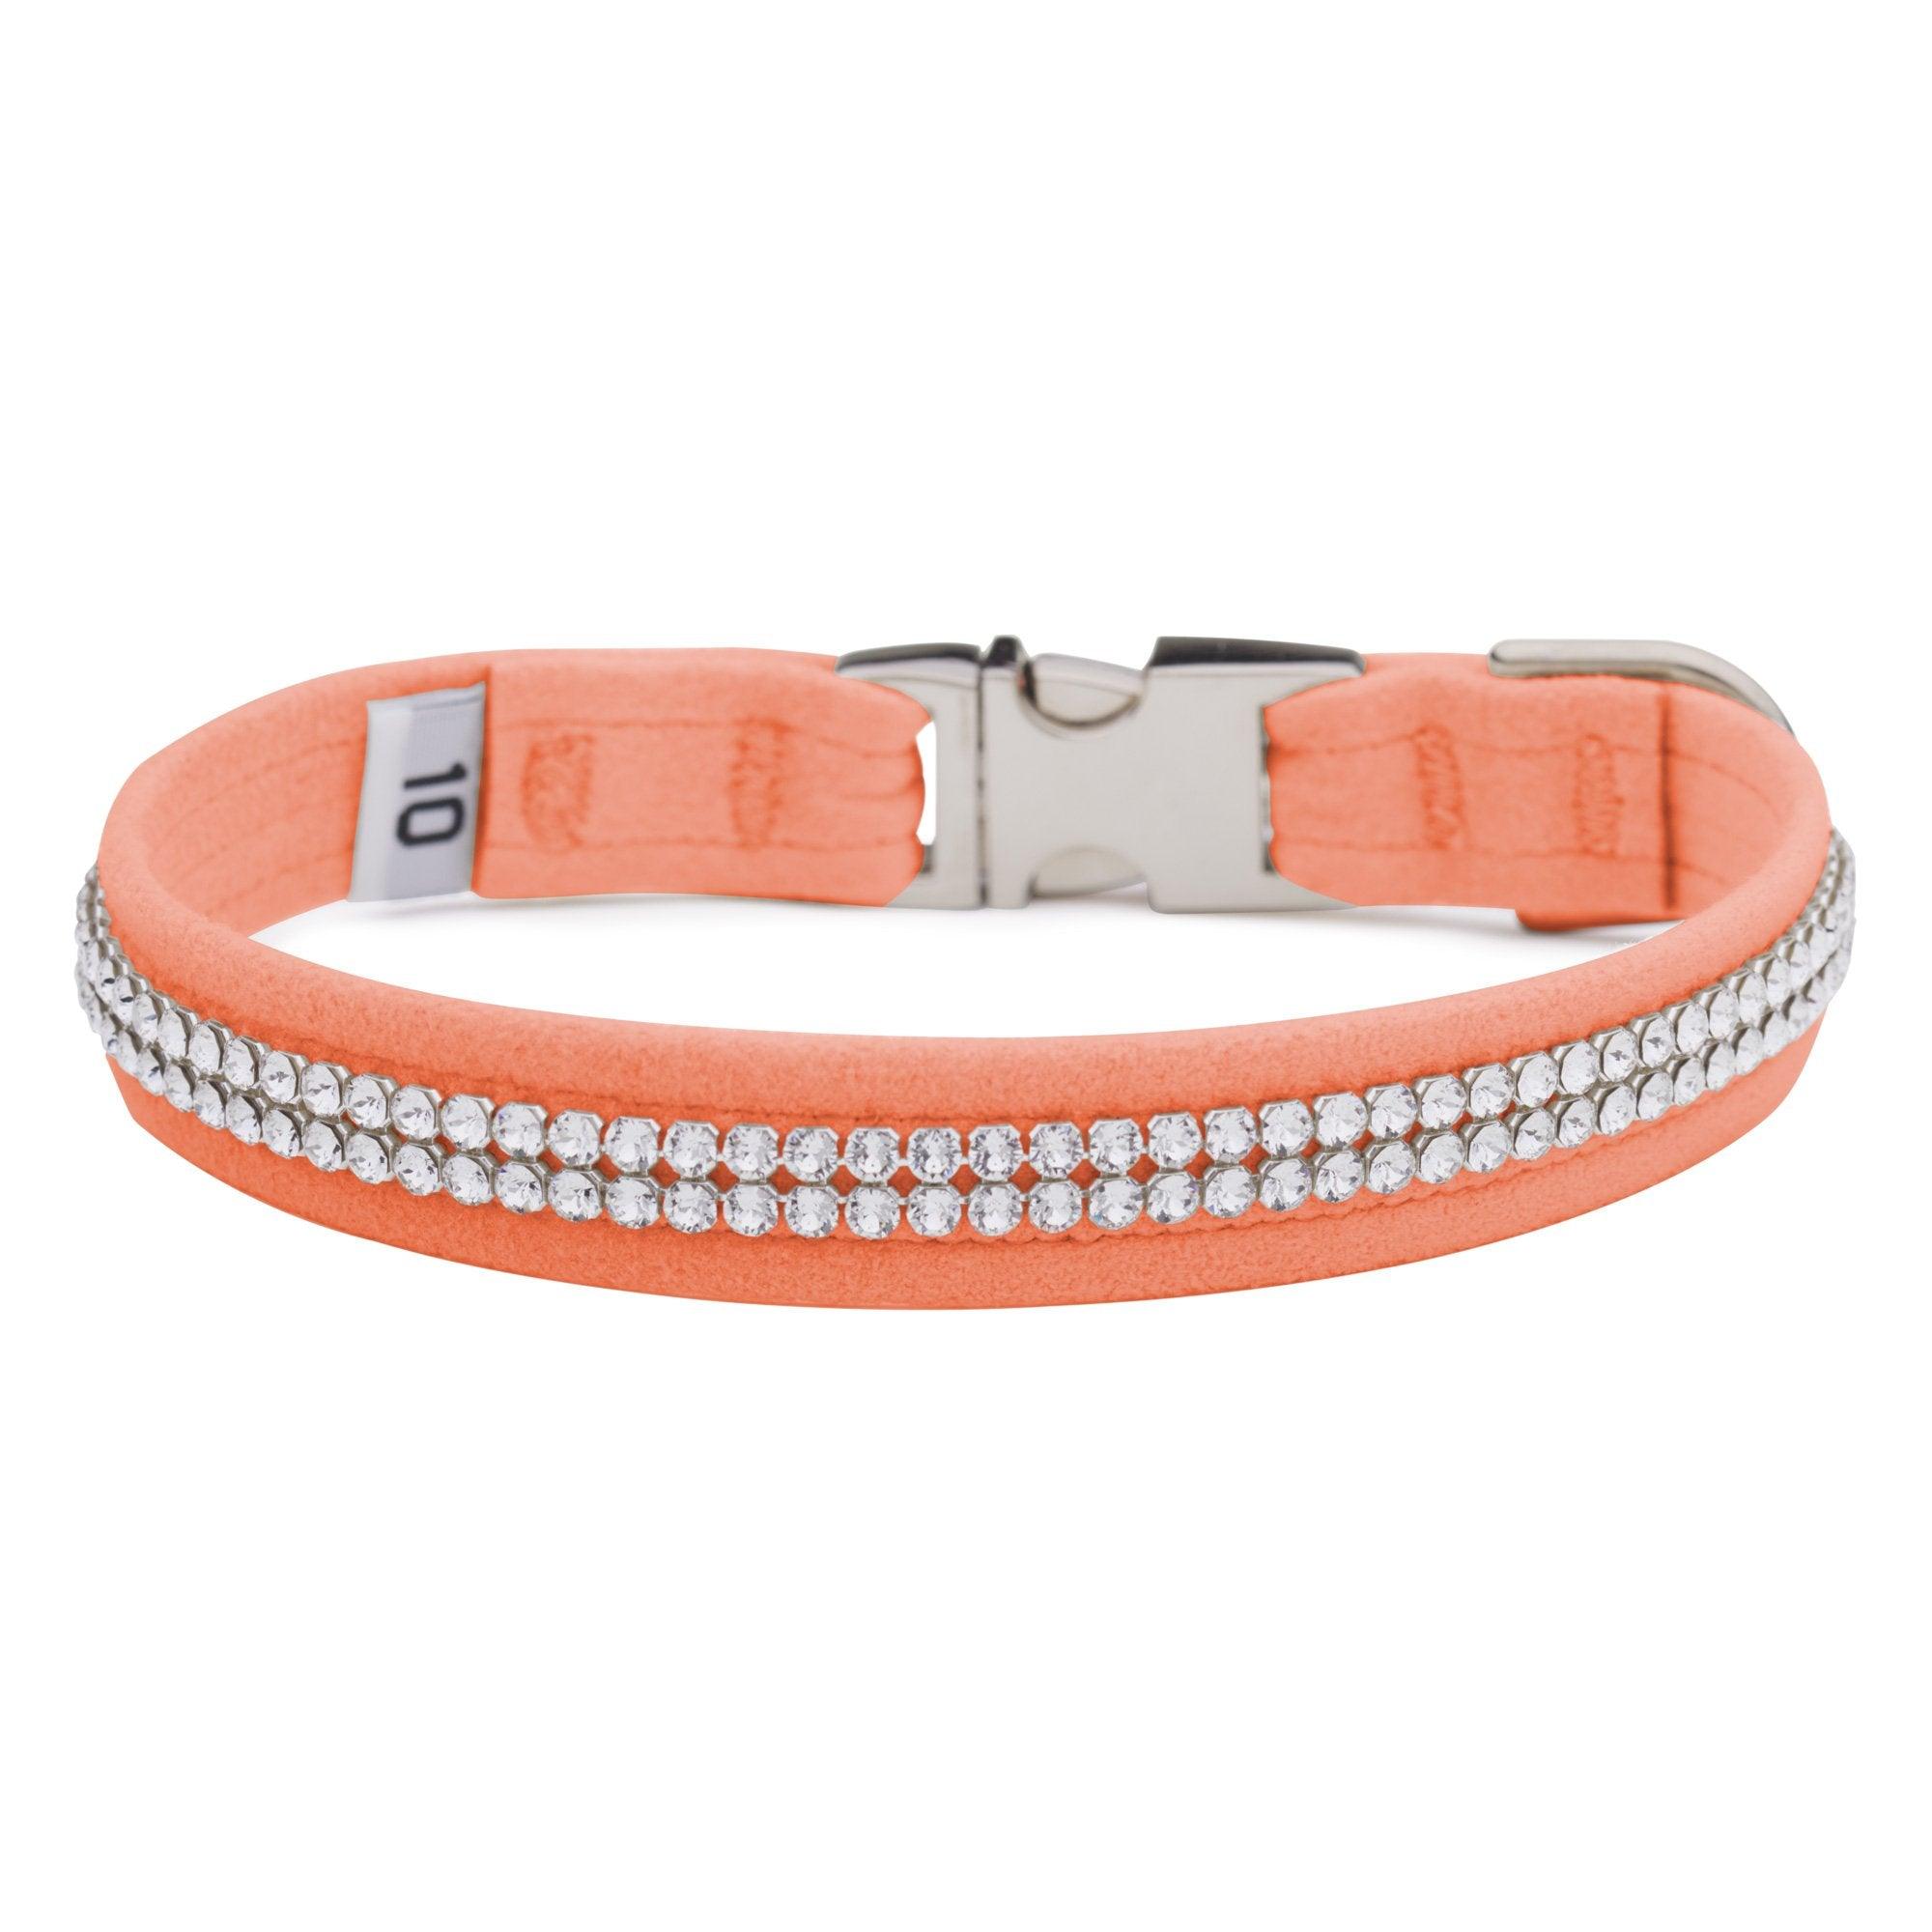 Peaches N Cream 2 Row Giltmore Perfect Fit Collar - Rocky & Maggie's Pet Boutique and Salon